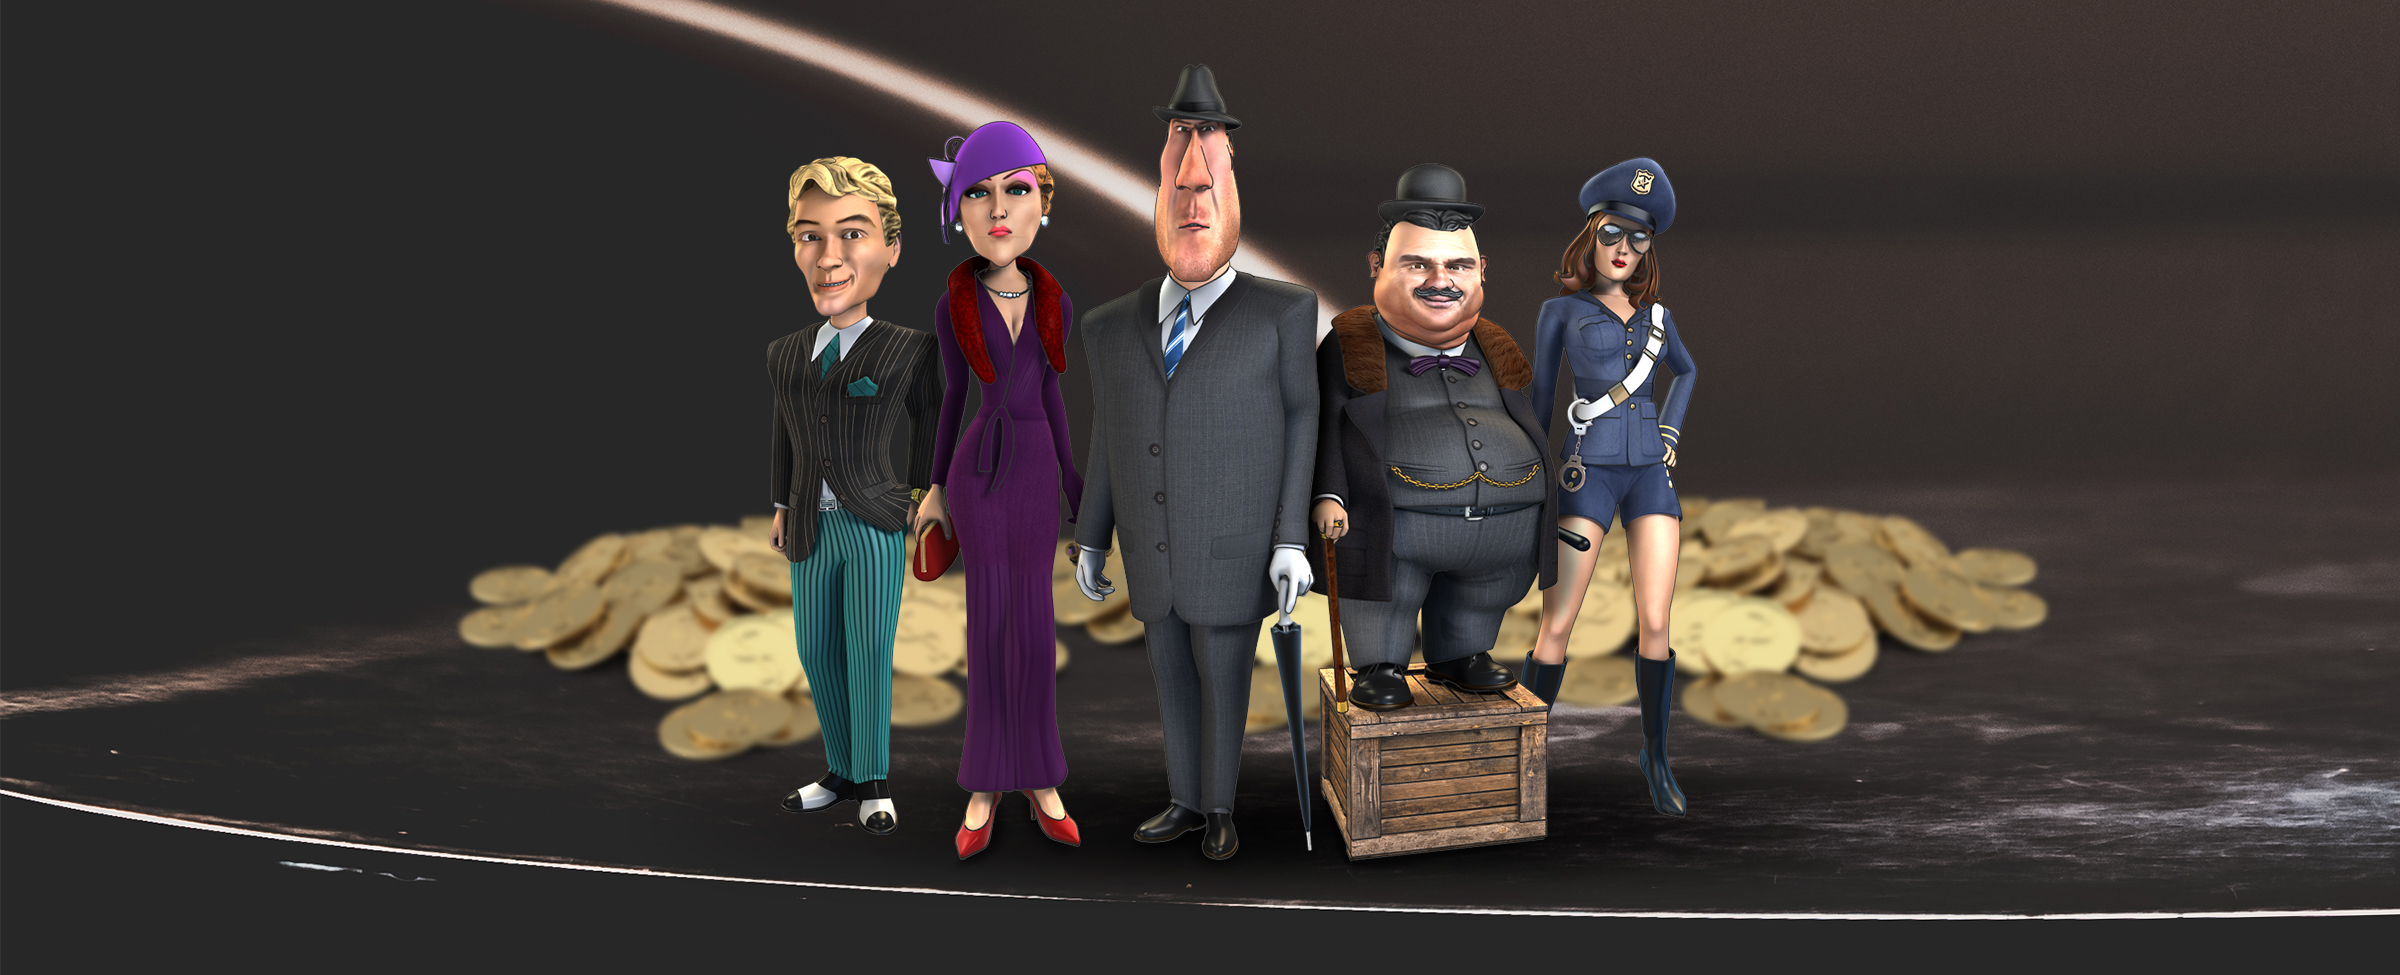 Five 3D-animated mobster characters from the Cafe Casino slots game, Mob Heist, are pictured standing in front of a pile of gold coins atop a marbled black table.